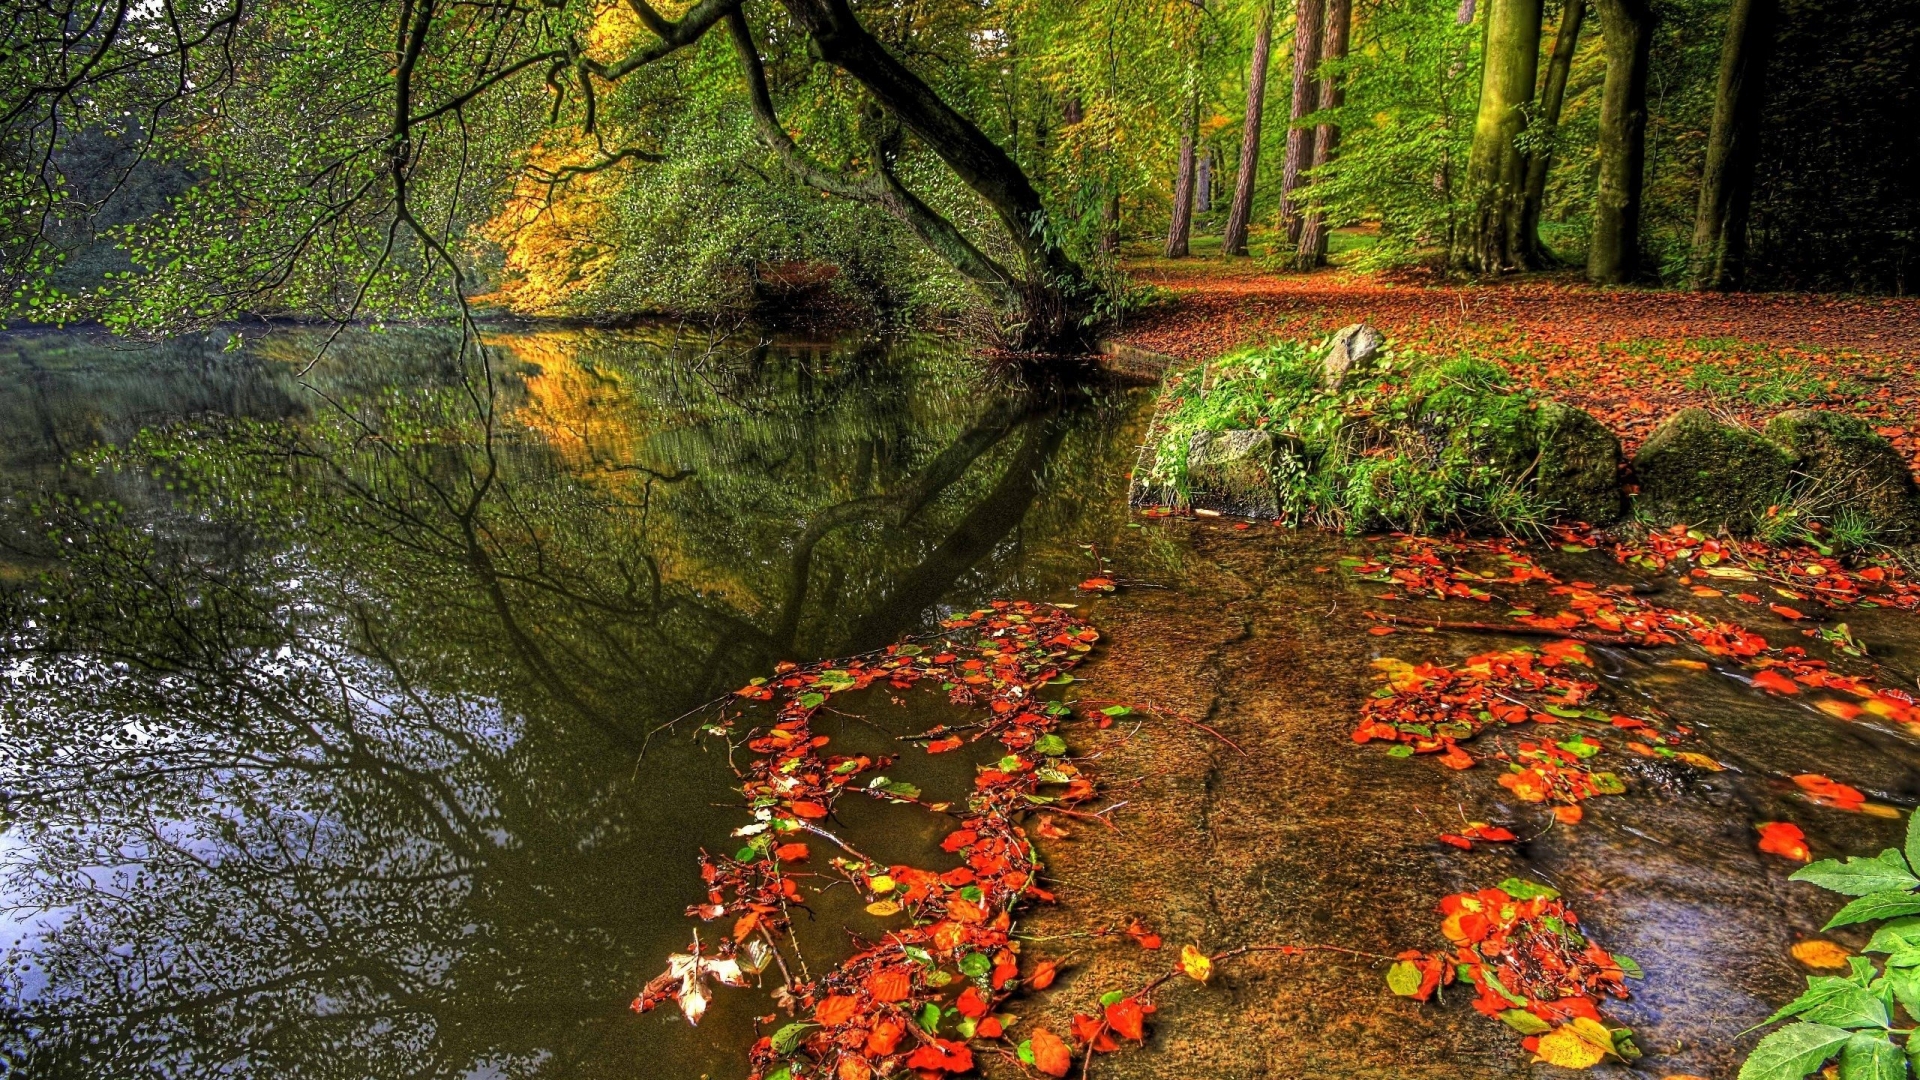 Autumn over the forest for 1920 x 1080 HDTV 1080p resolution